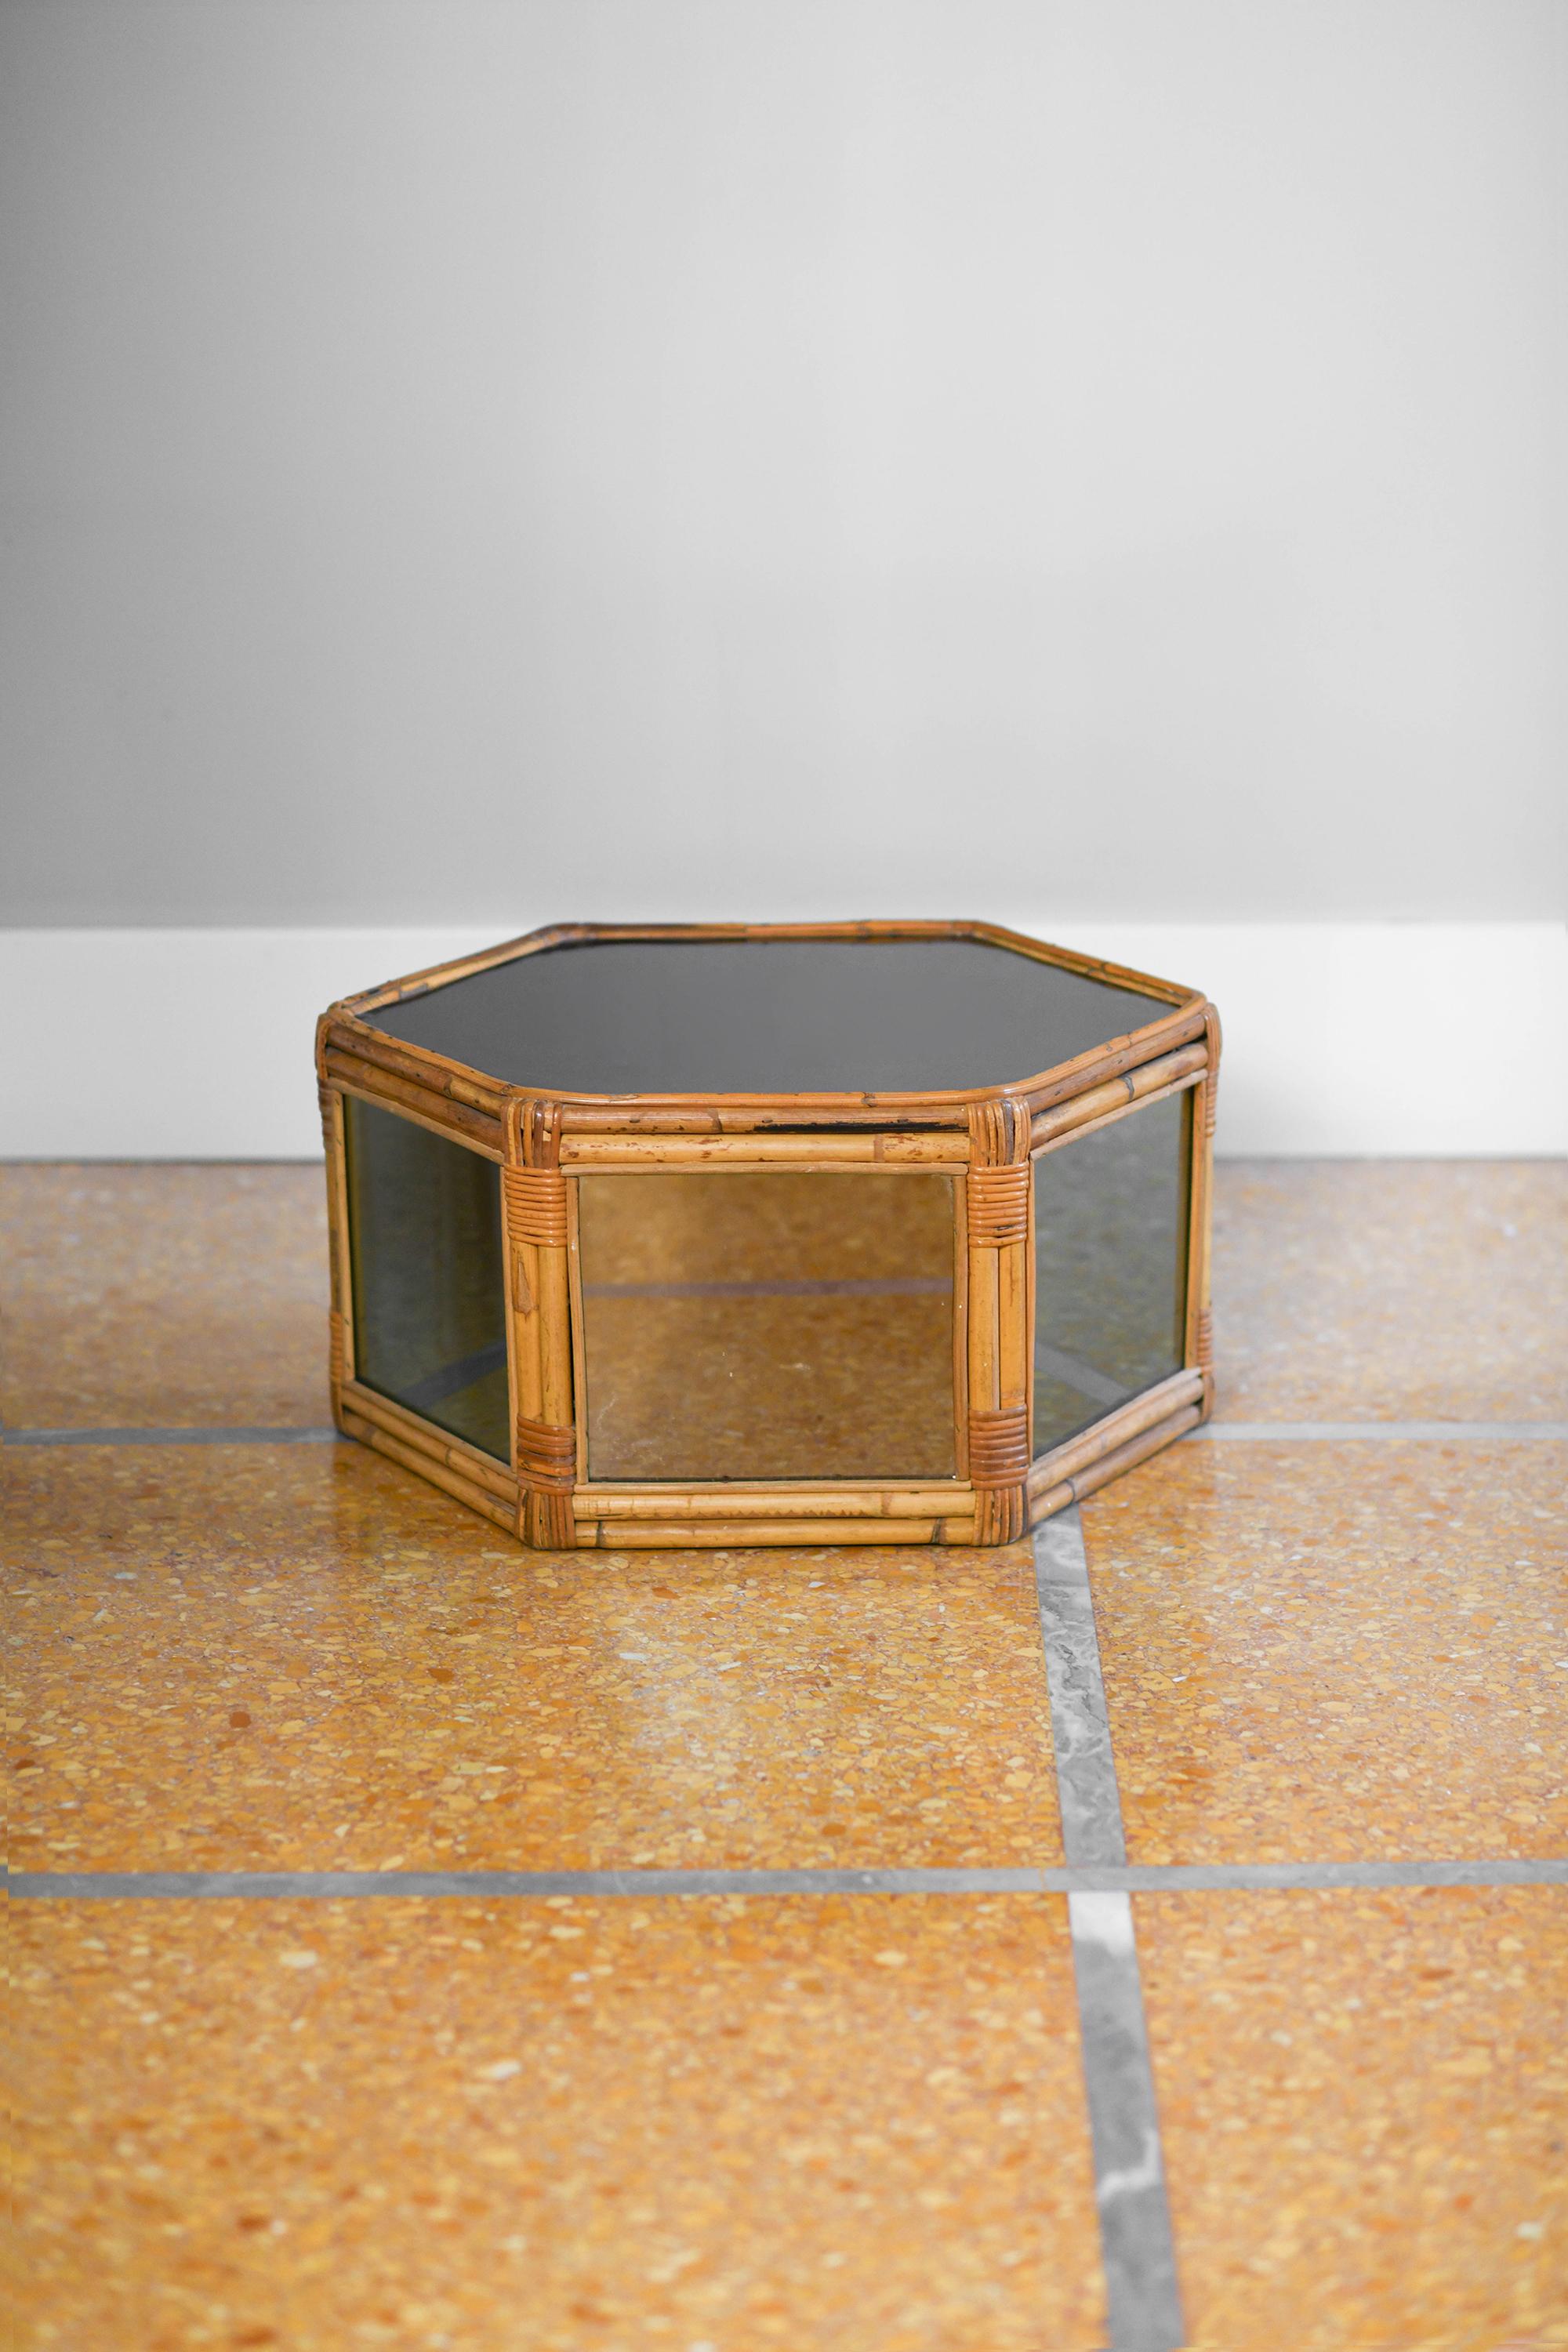 Hexagonal rattan coffee table, smoked mirrored glass and black methacrylate
Product details
Dimensions: 60 W x 30 H x 60 D